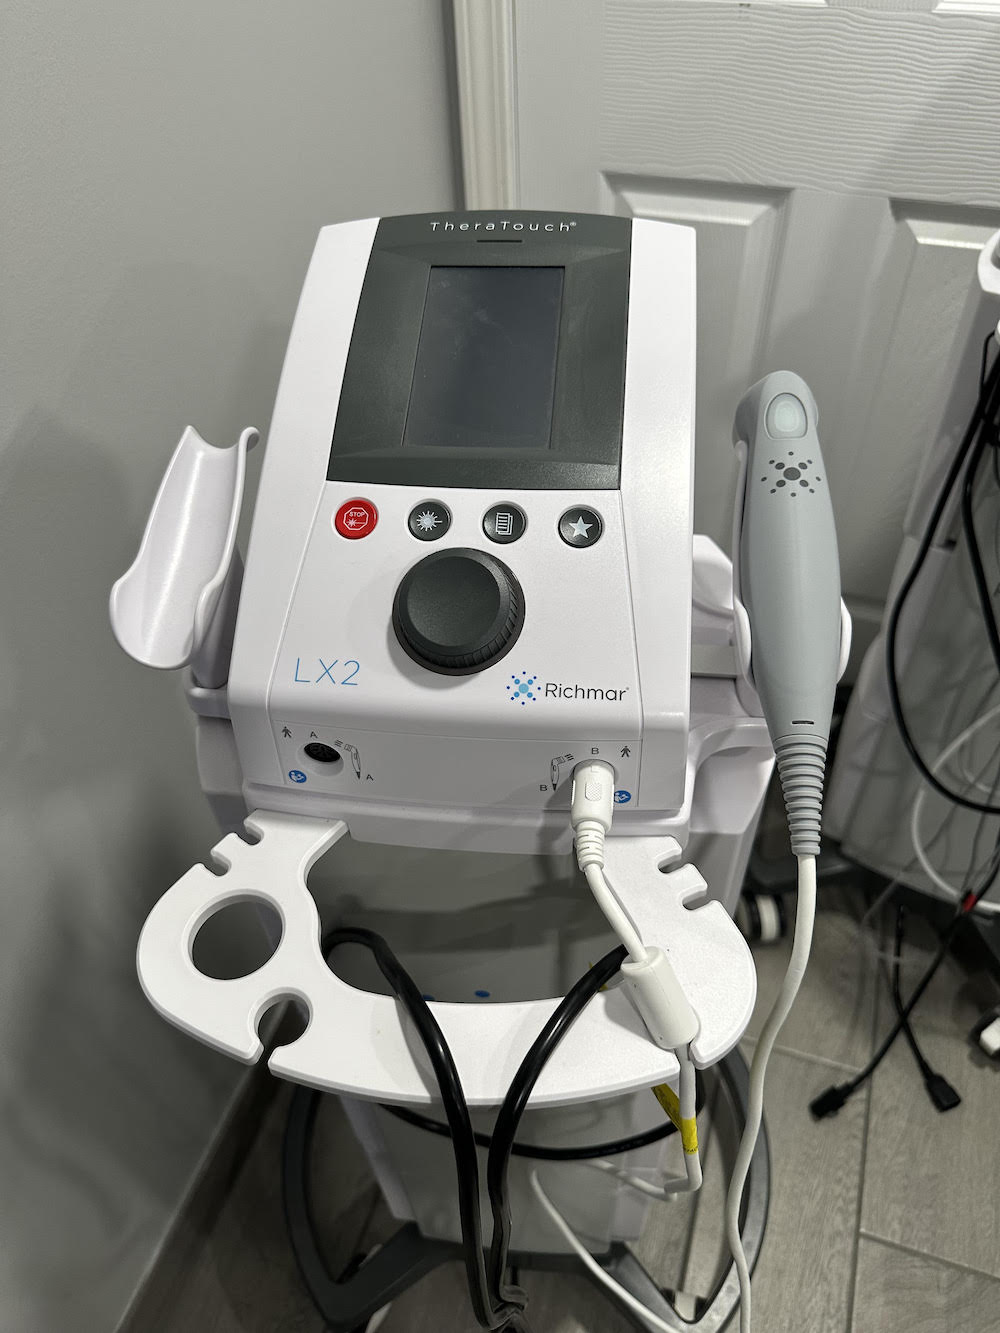 RICHMAR THERATOUCH LX2 LASER WITH CART